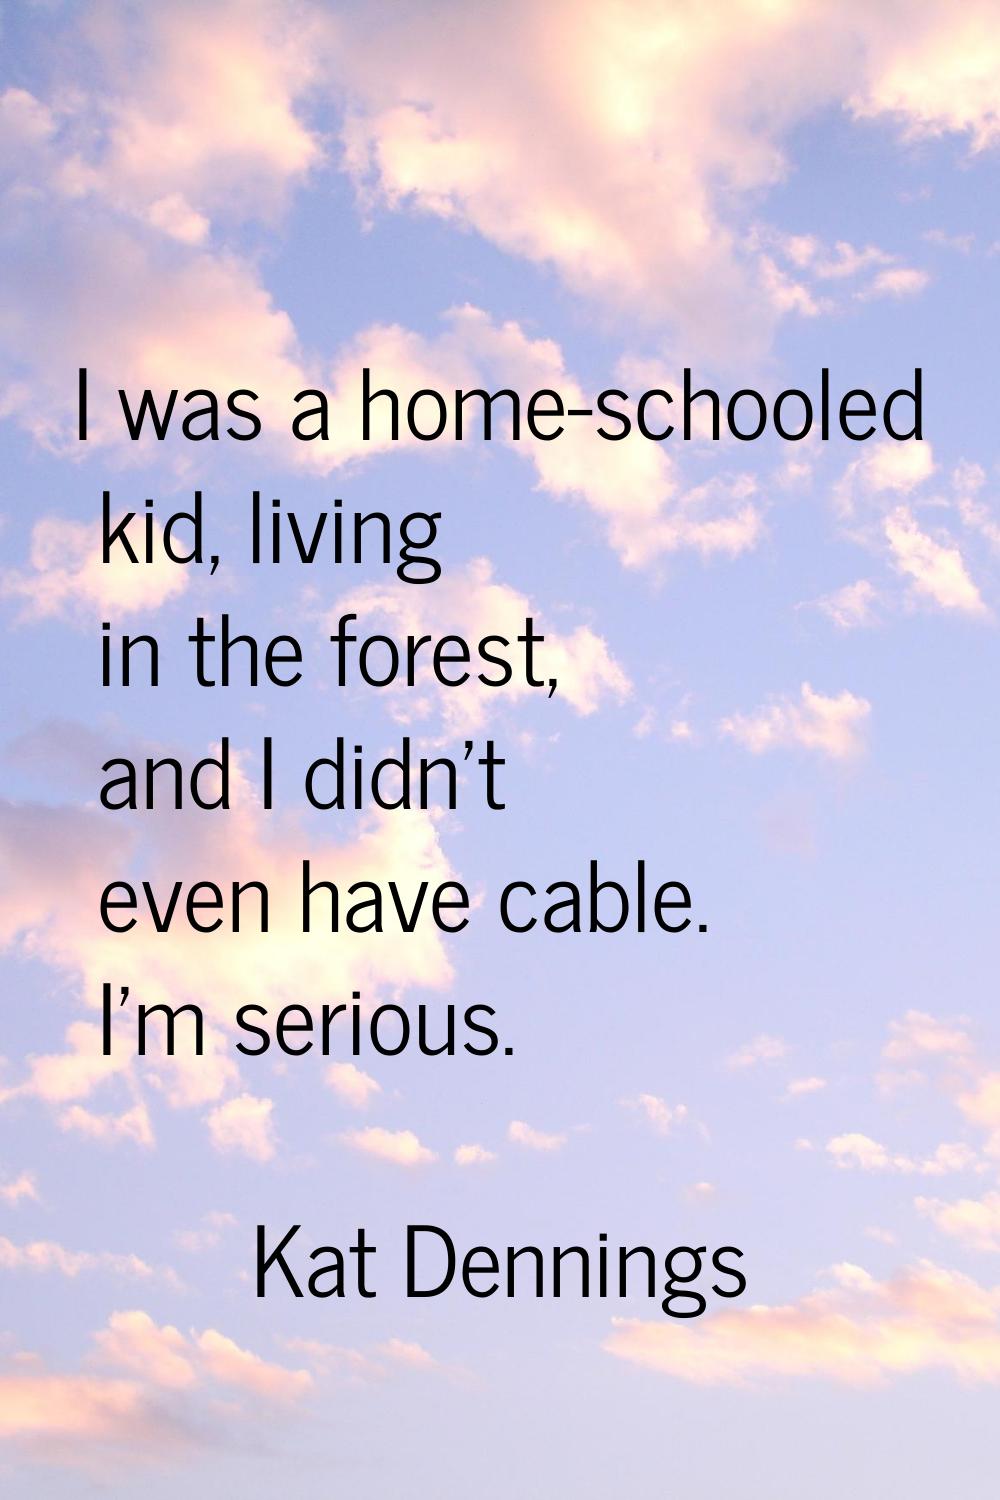 I was a home-schooled kid, living in the forest, and I didn't even have cable. I'm serious.